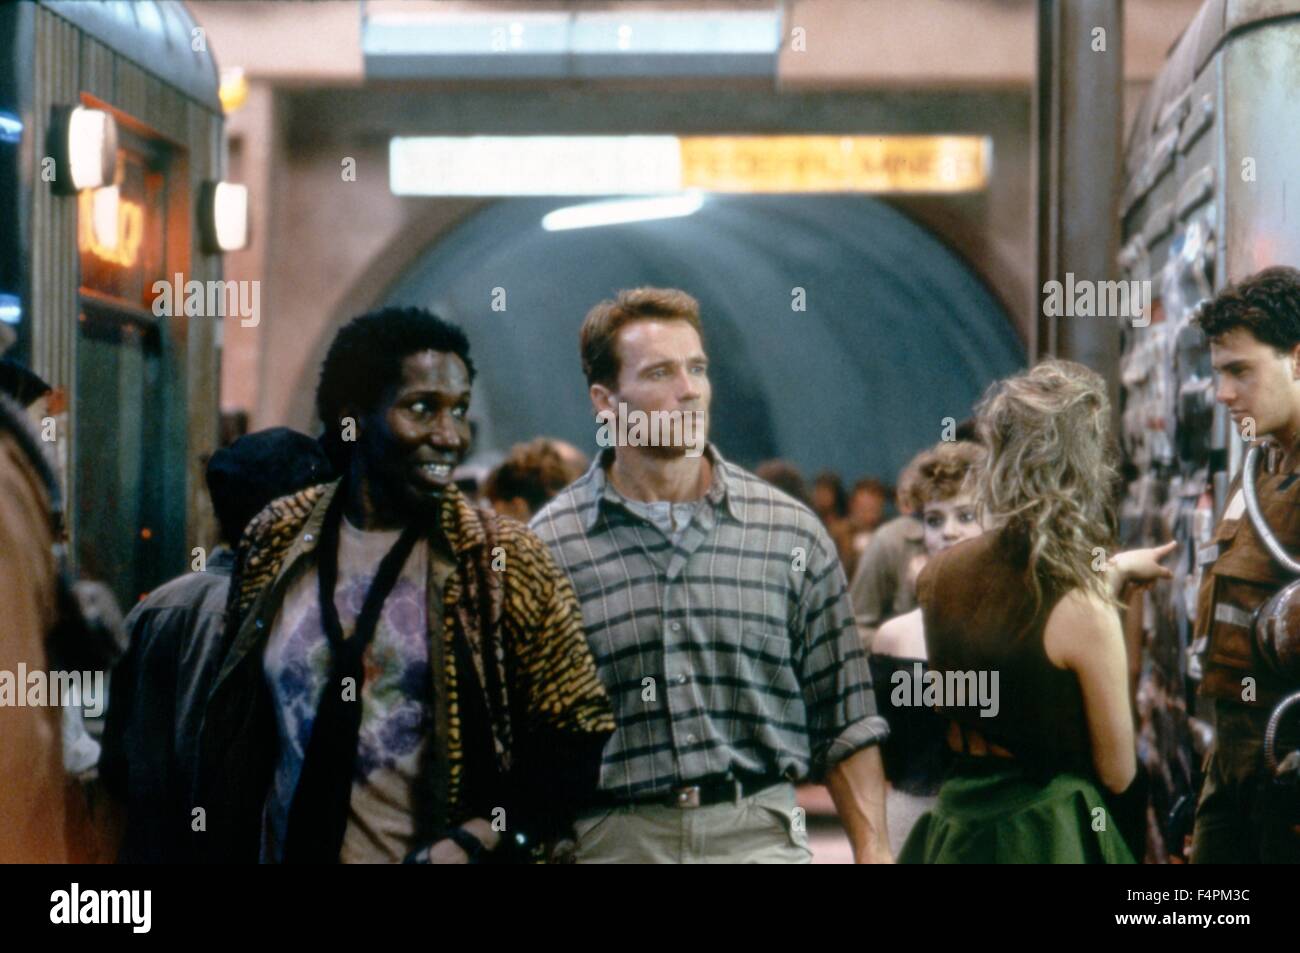 Mel Johnson Jr. and Arnold Scharzenegger / Total Recall  / 1990 directed by Paul Verhoeven [TriStar Pictures] Stock Photo